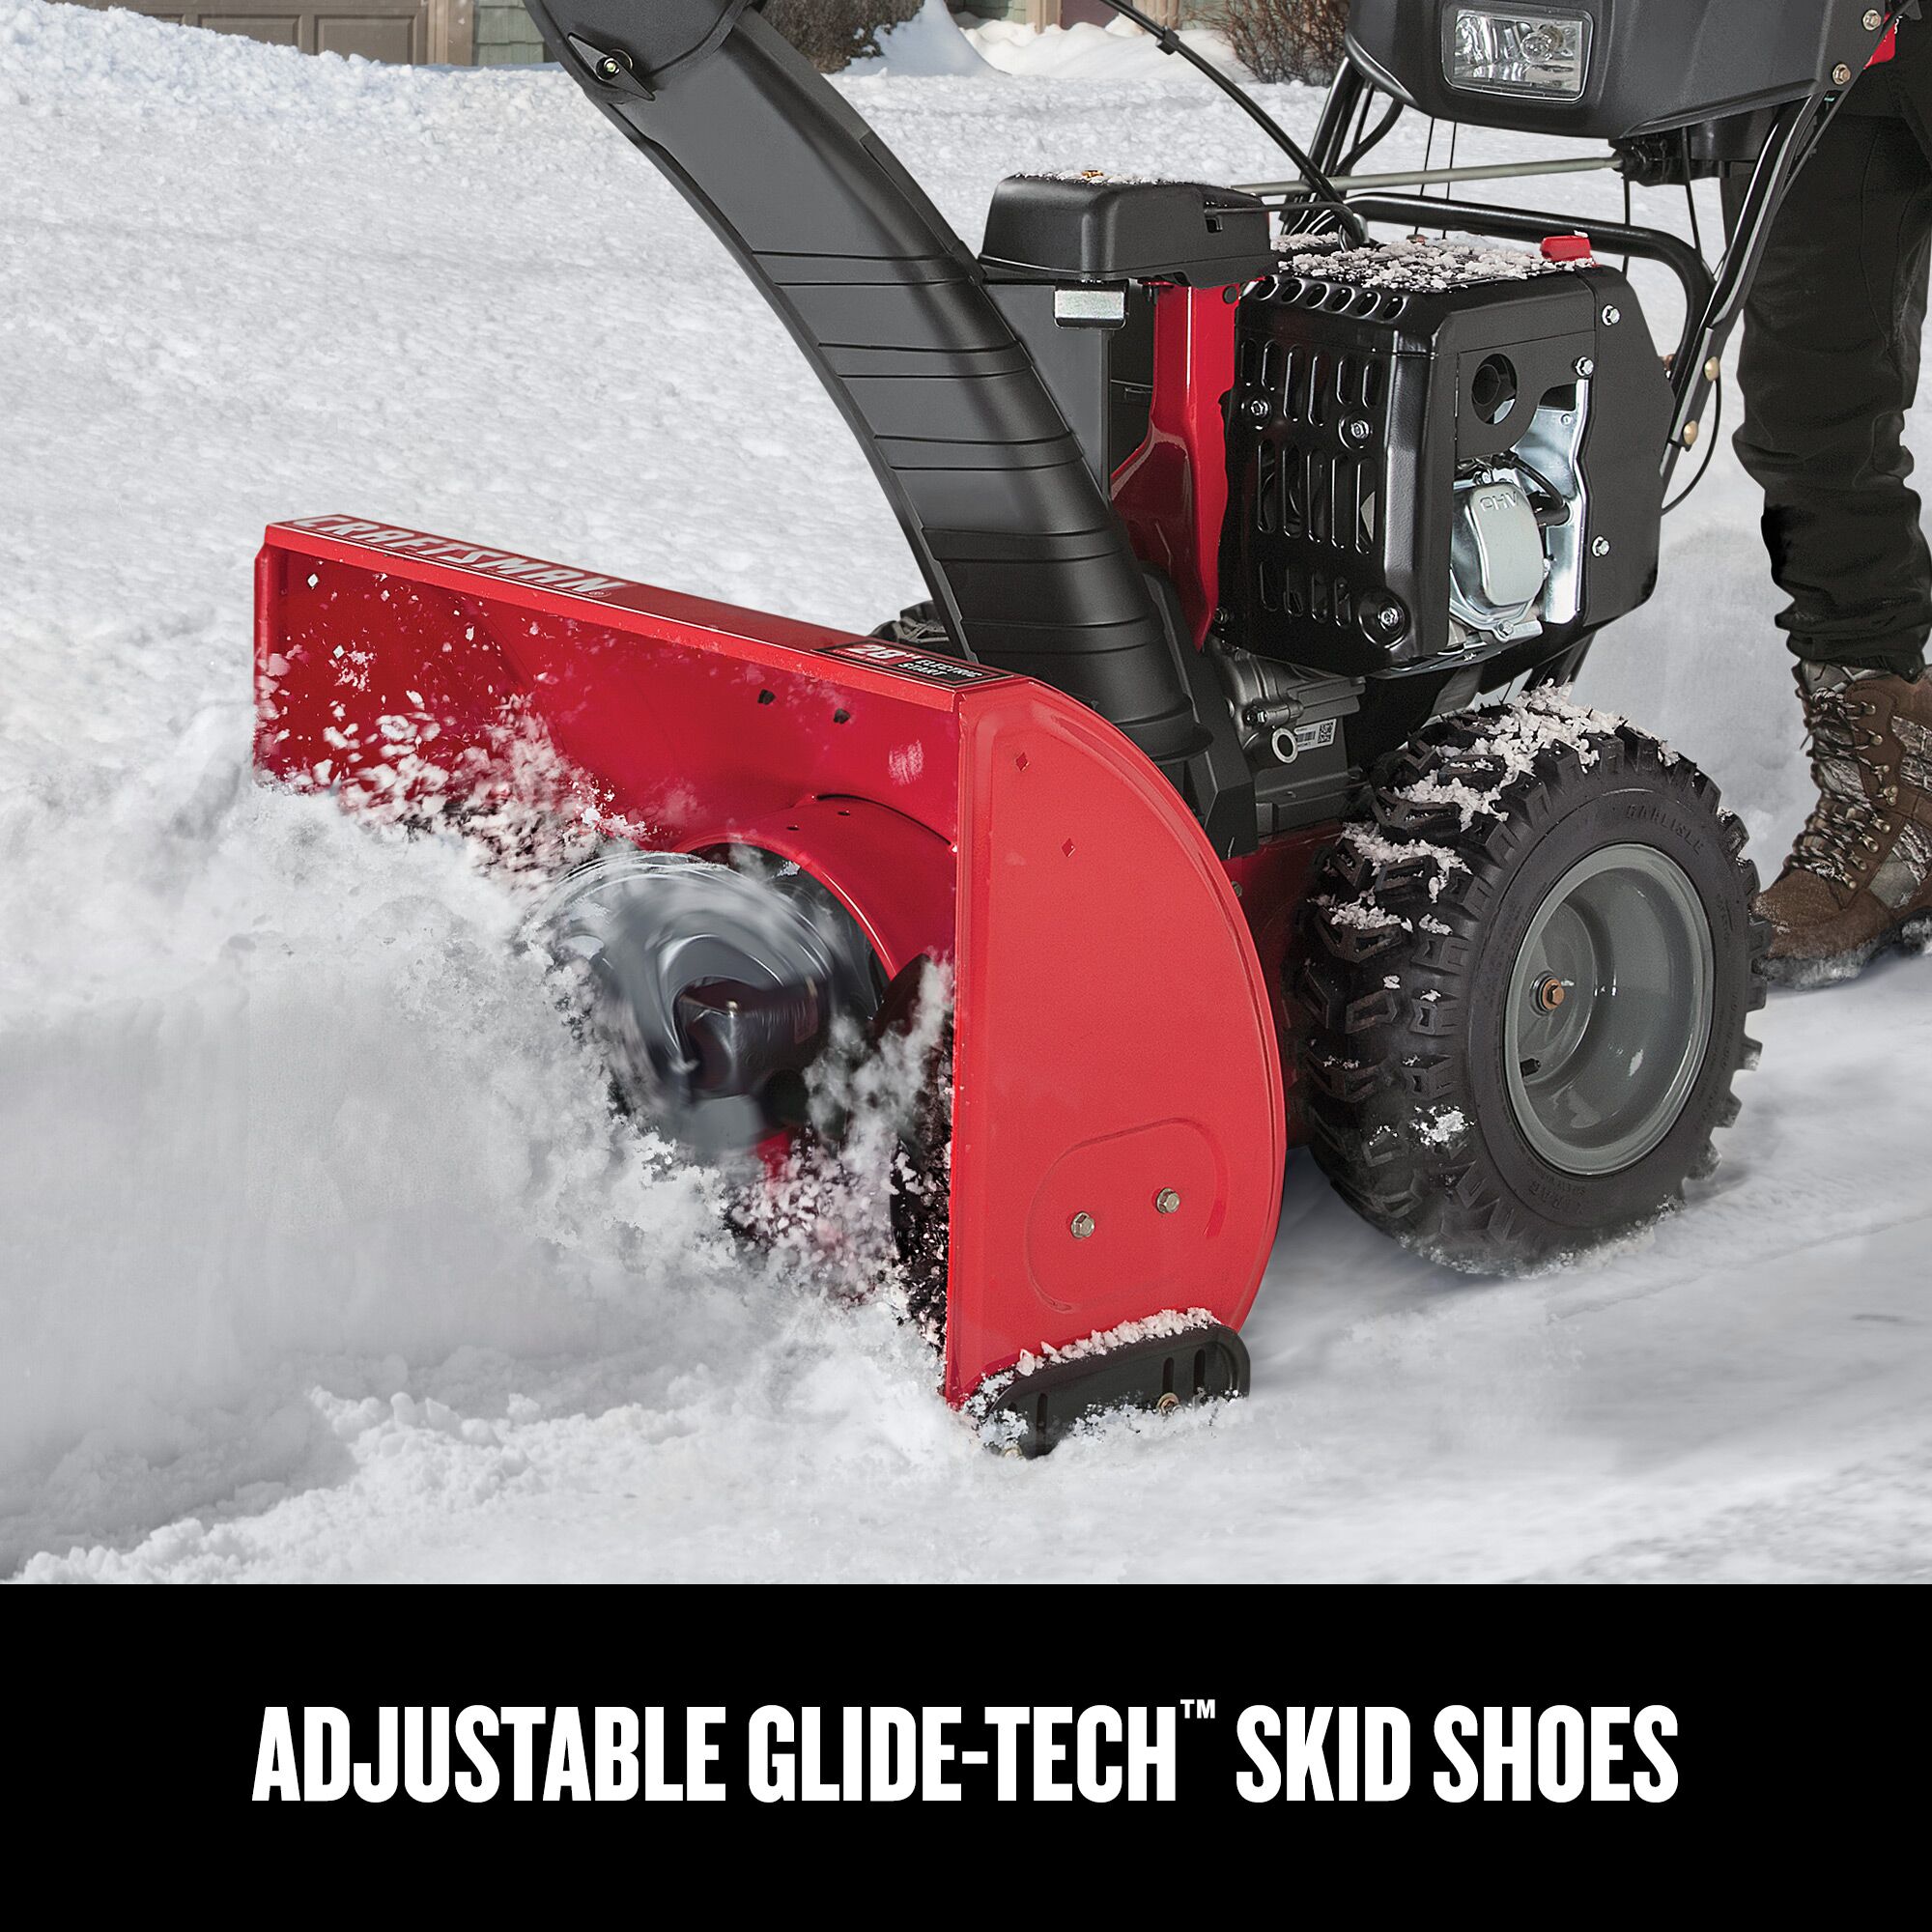 CRAFTSMAN 28-in 357cc Electric Start Three-Stage Snow Blower focused in on glide-tech skid shoes